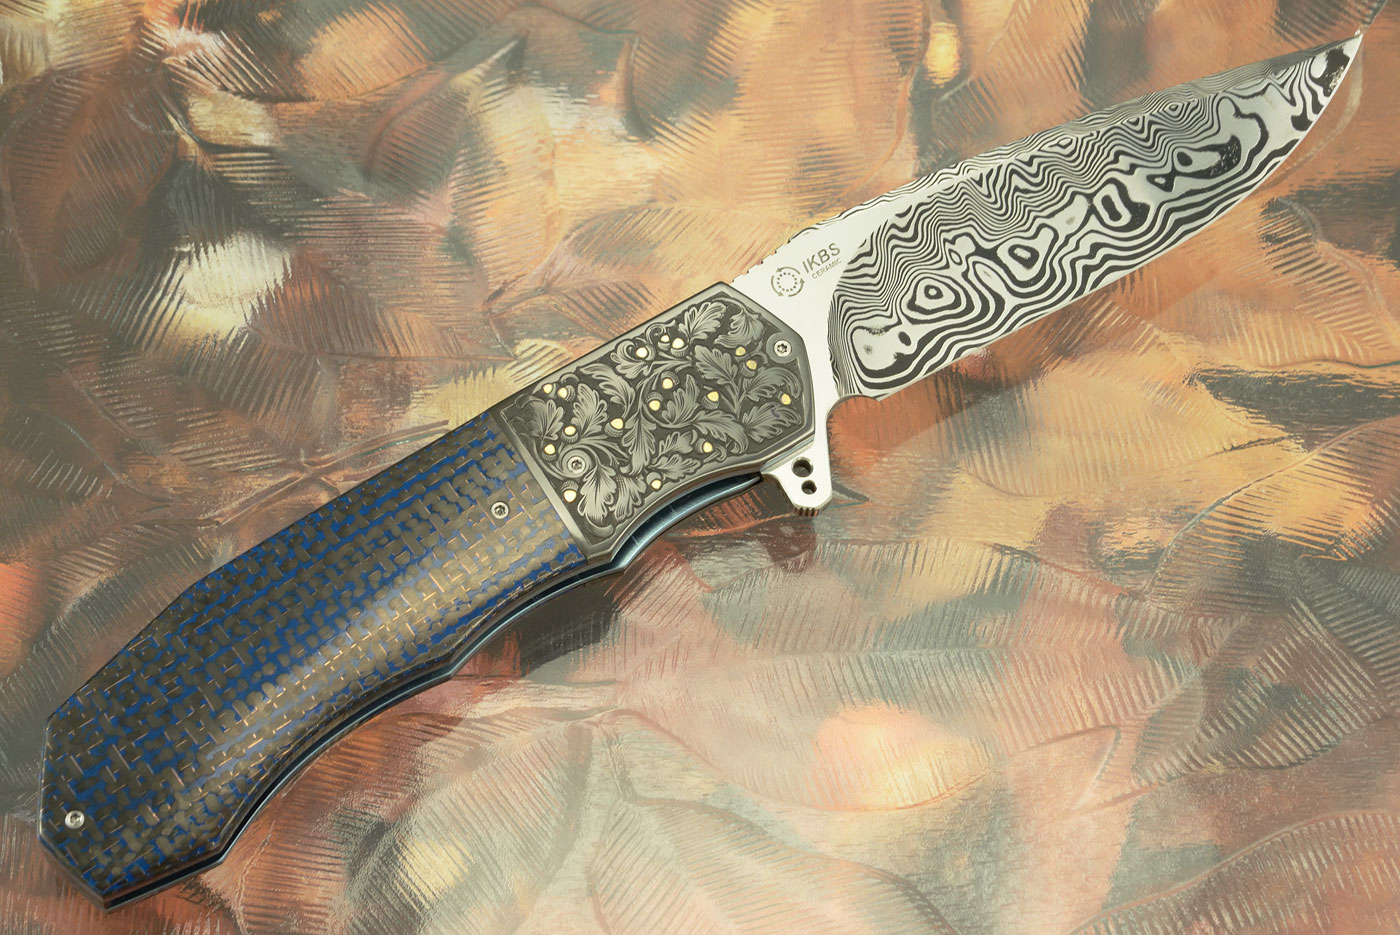 L44 Flipper with Damascus, Blue Lightning Strike Carbon Fiber, and Engraved Zirconium with Gold Inlay (Ceramic IKBS) - LEFT HANDED!!